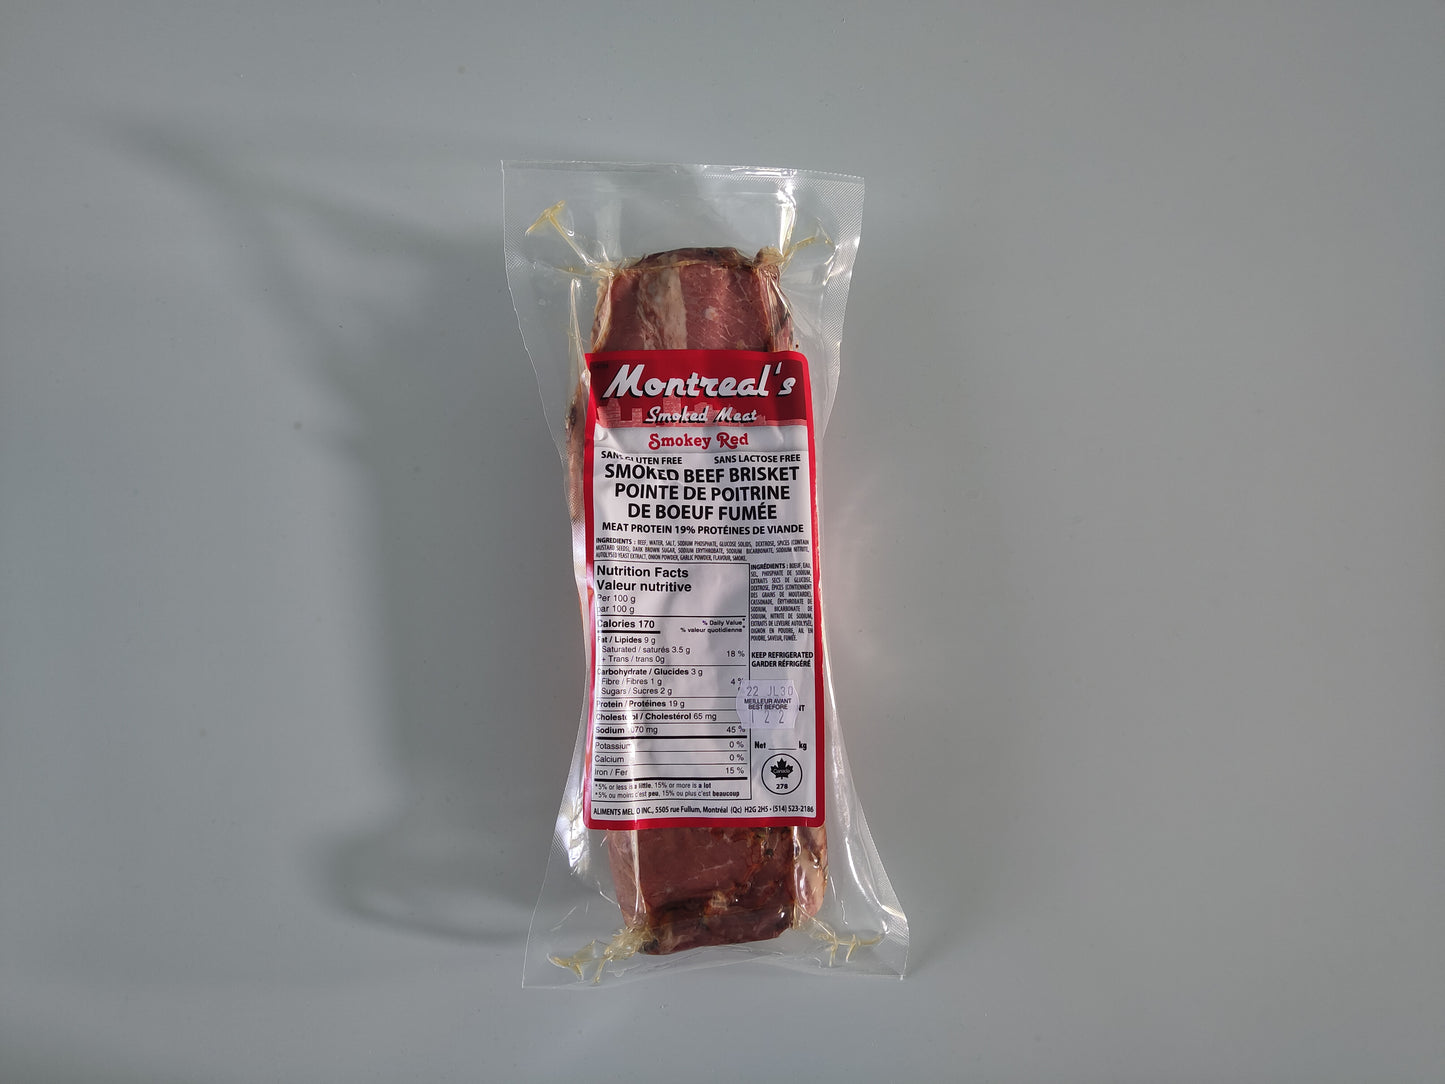 Sliced "Smokey Red" Montreal Smoked Meat (1lb)